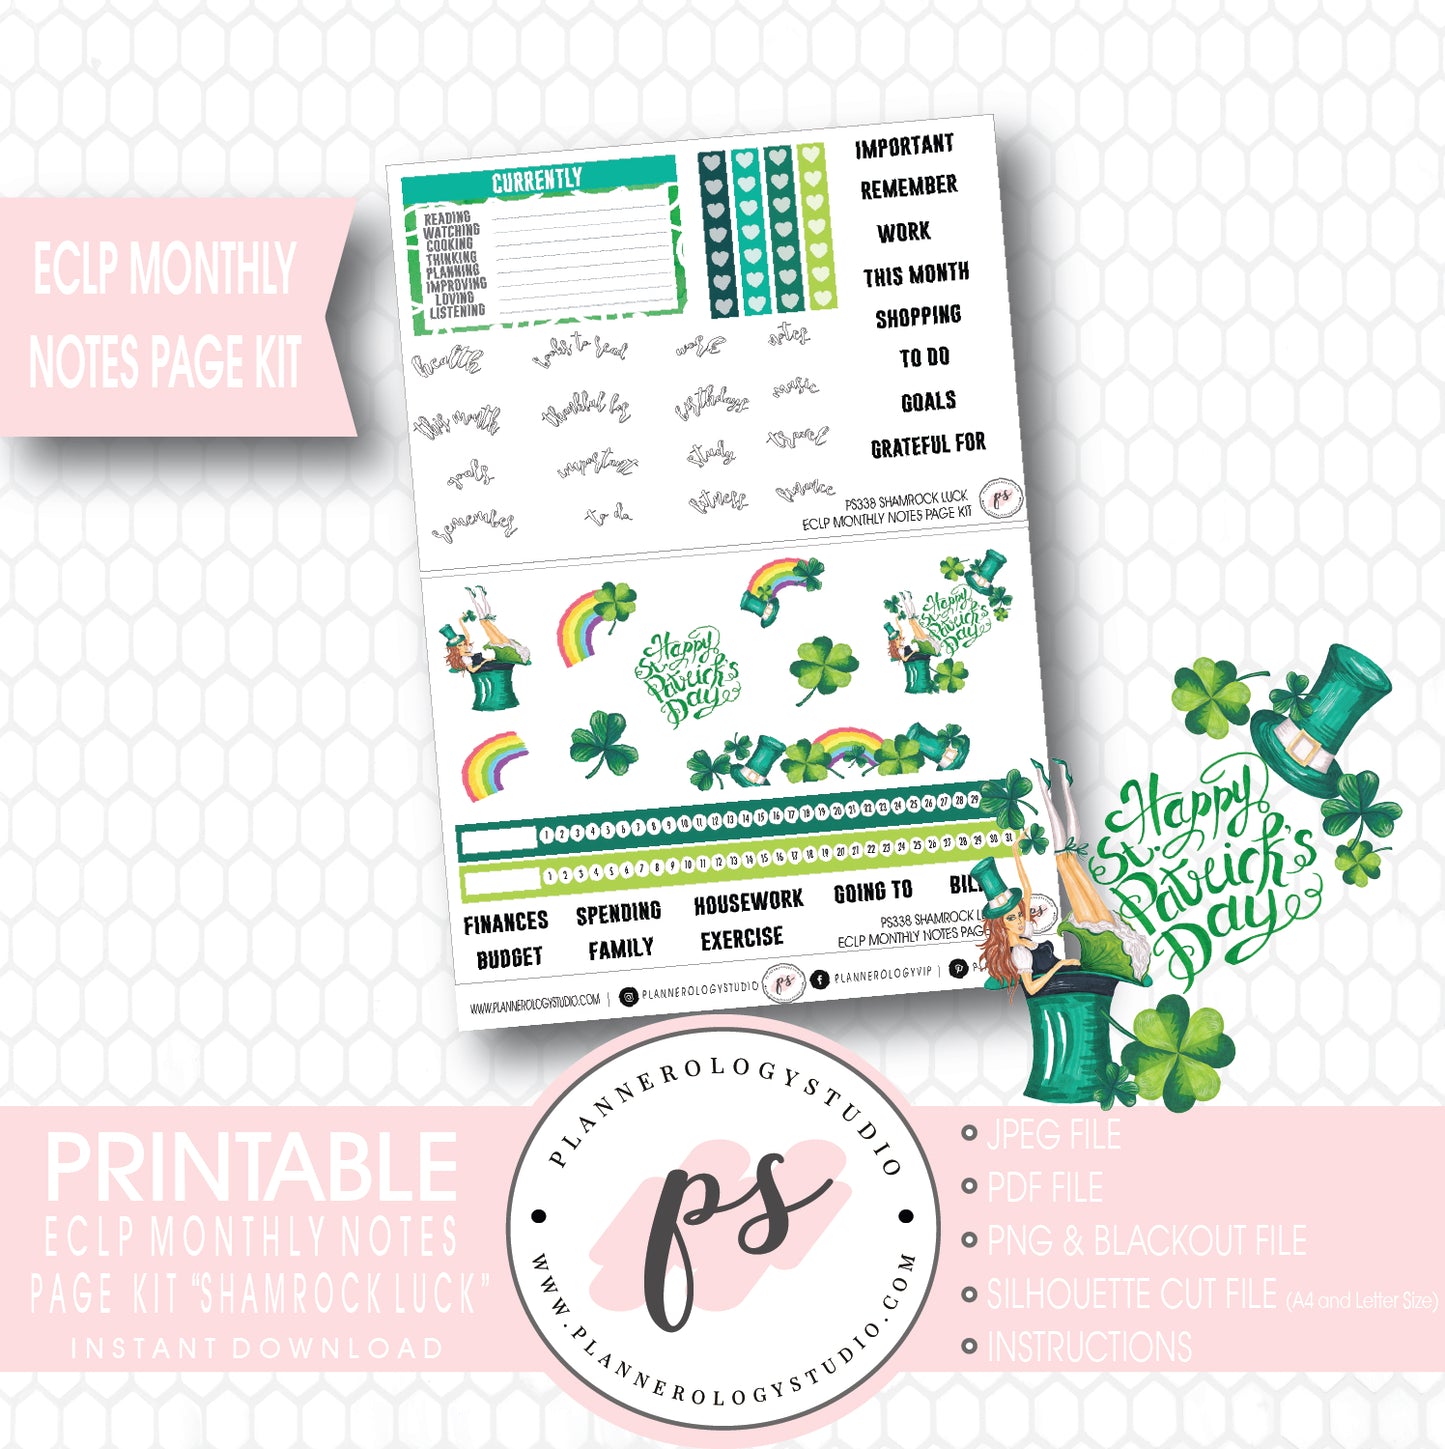 Shamrock Luck Monthly Notes Page Kit Digital Printable Planner Stickers (for use with ECLP) - Plannerologystudio